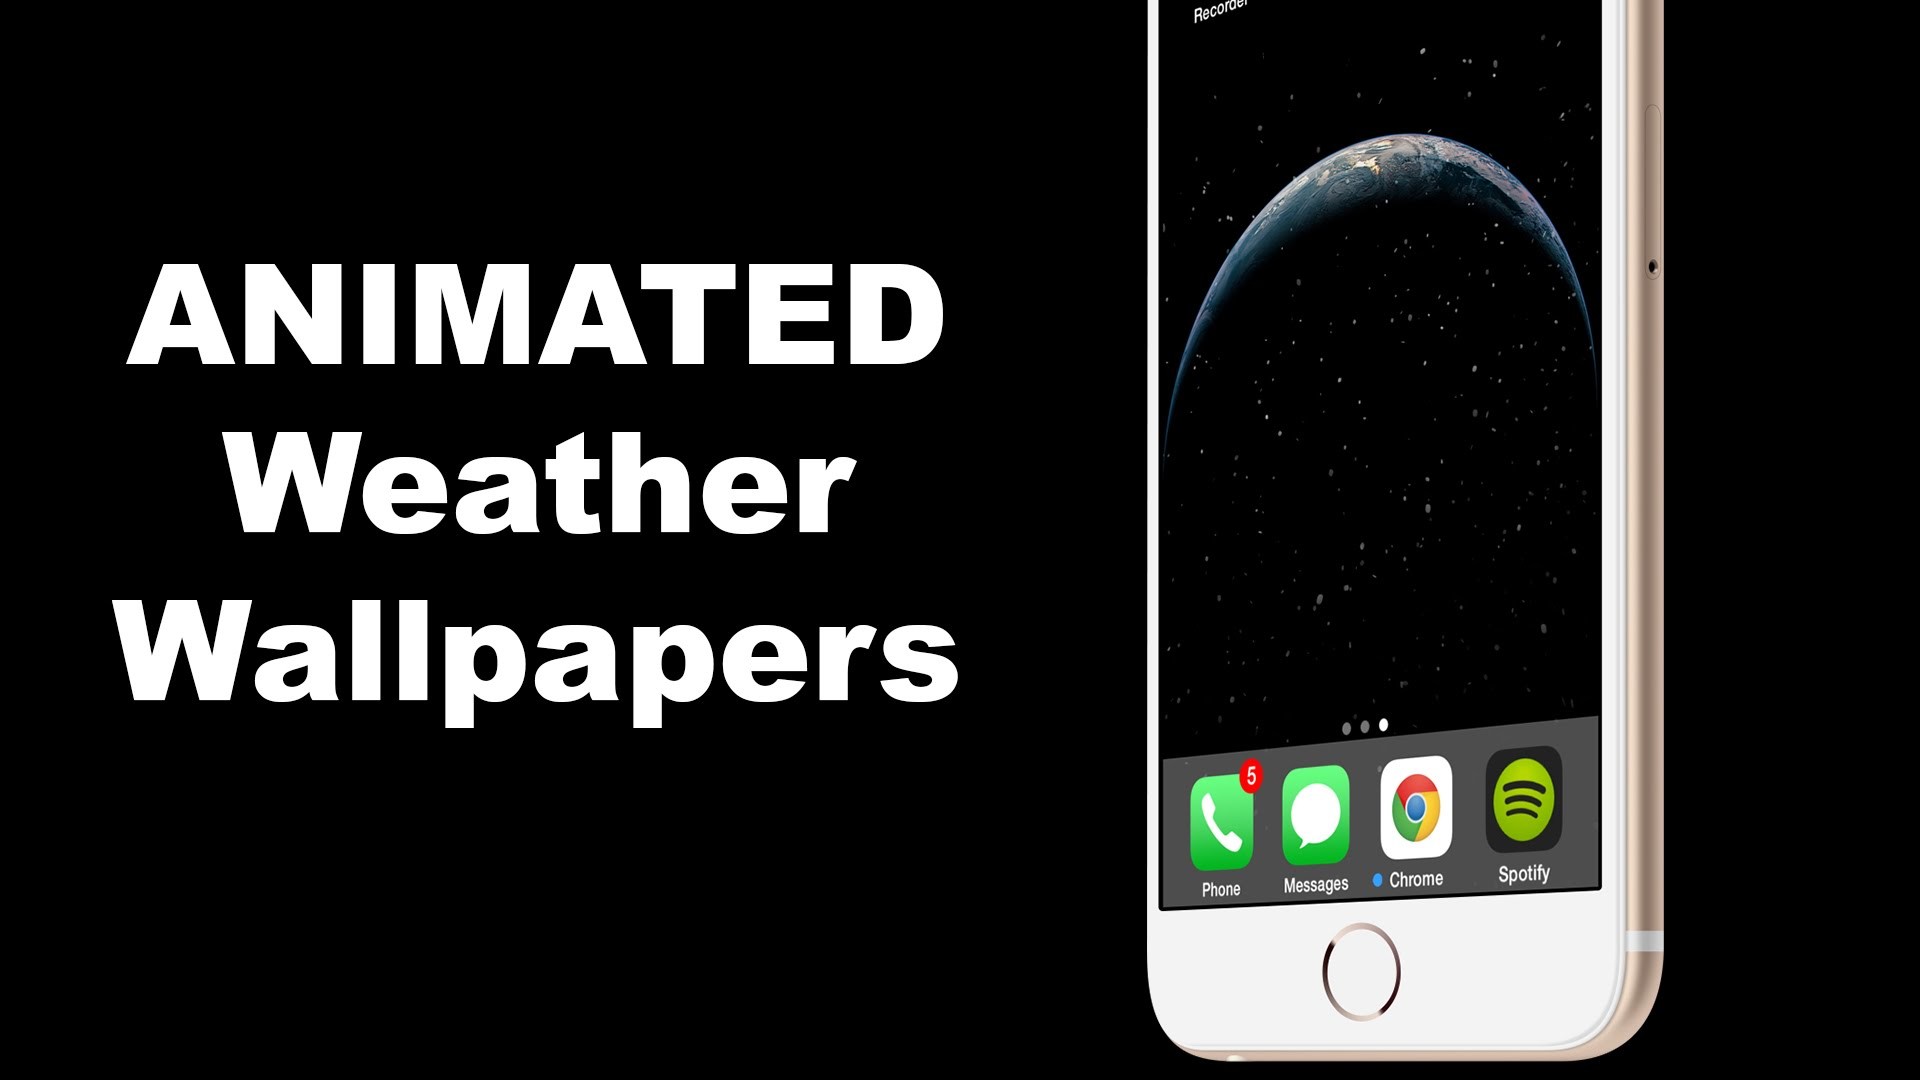 How To Add Changing Animated Weather Wallpapers For - Smartphone - HD Wallpaper 